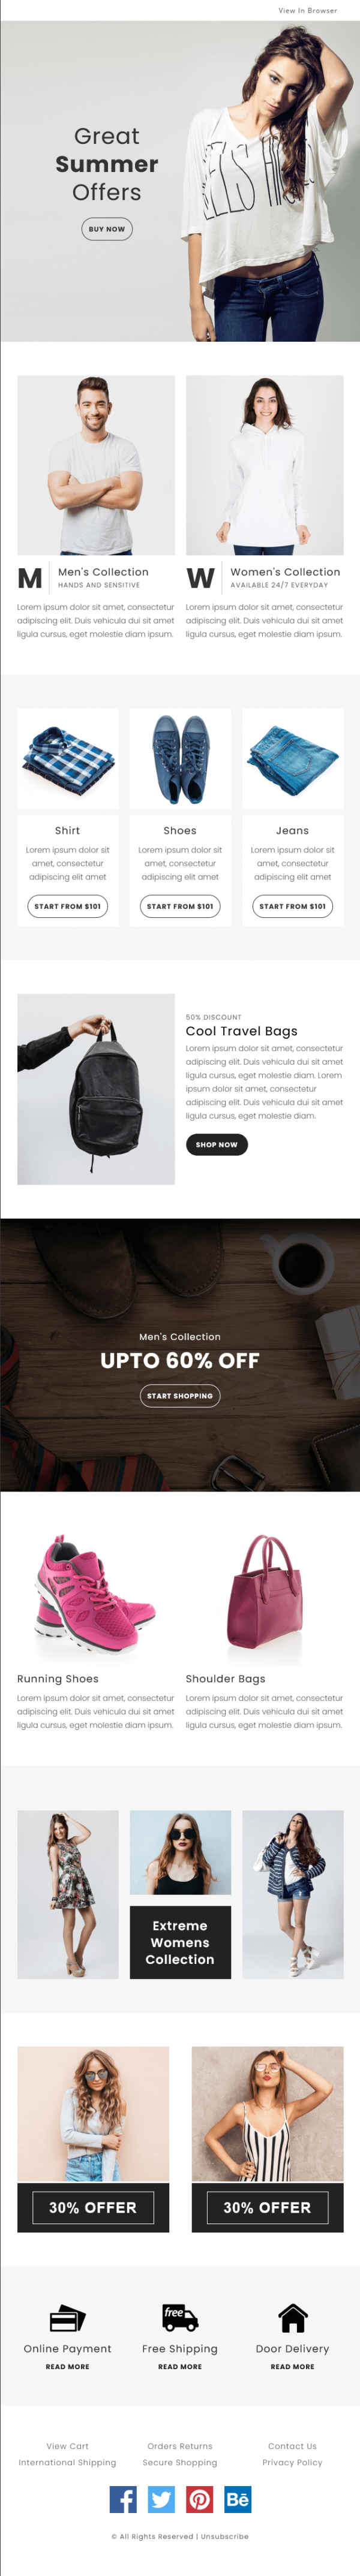 Style - Multipurpose Responsive Email Template